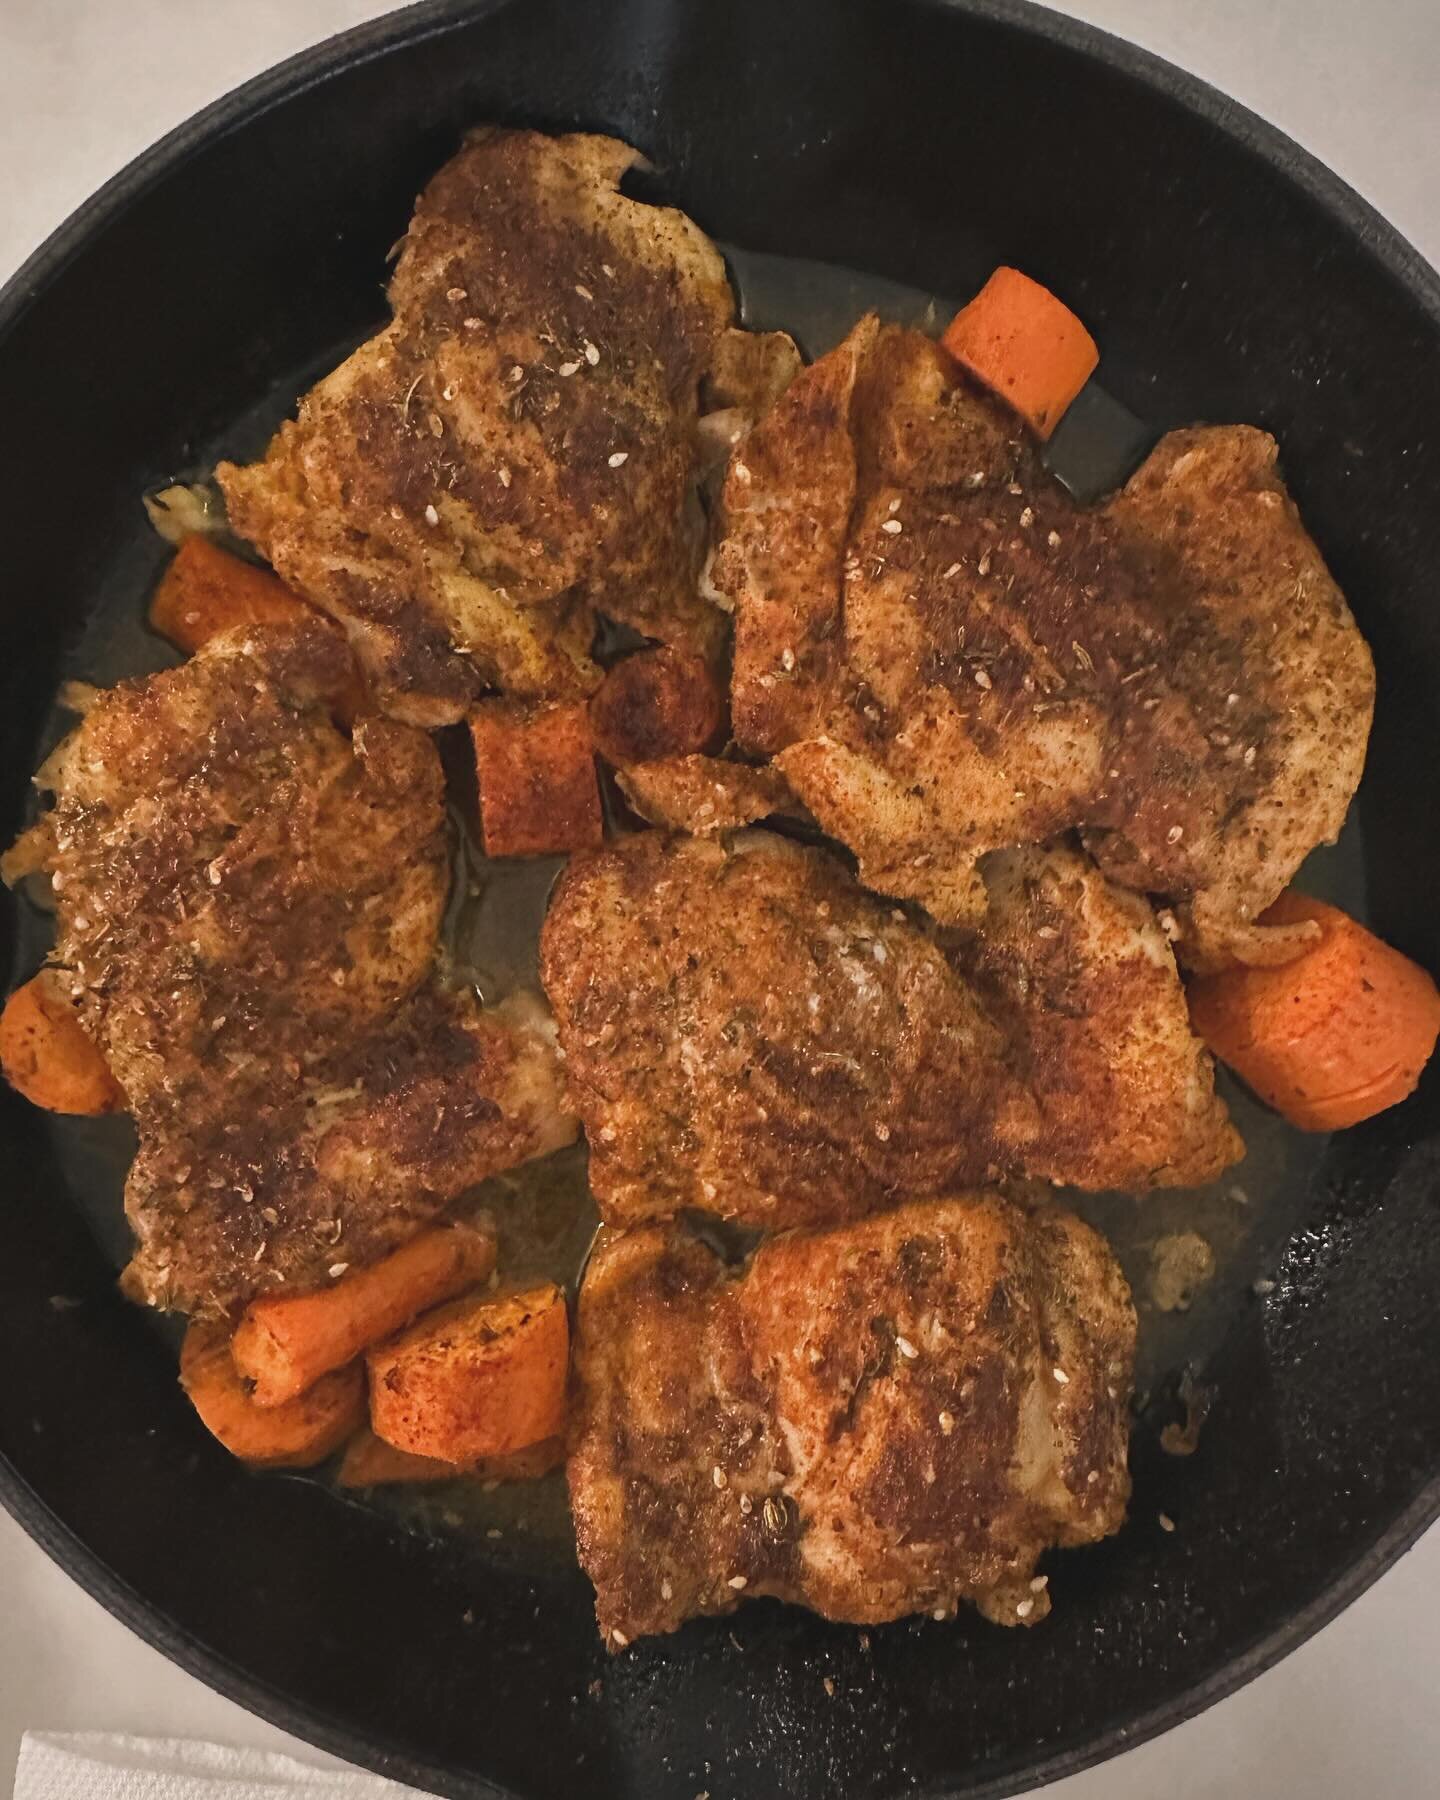 Lots of recipe requests! Chicken thighs with a tandoori masala seasoning rub and za&rsquo;atar blend and carrots in the oven for 25 minutes at 375. In a separate pan we roasted broccoli with olive oil and salt and pepper for the same amount of time. 